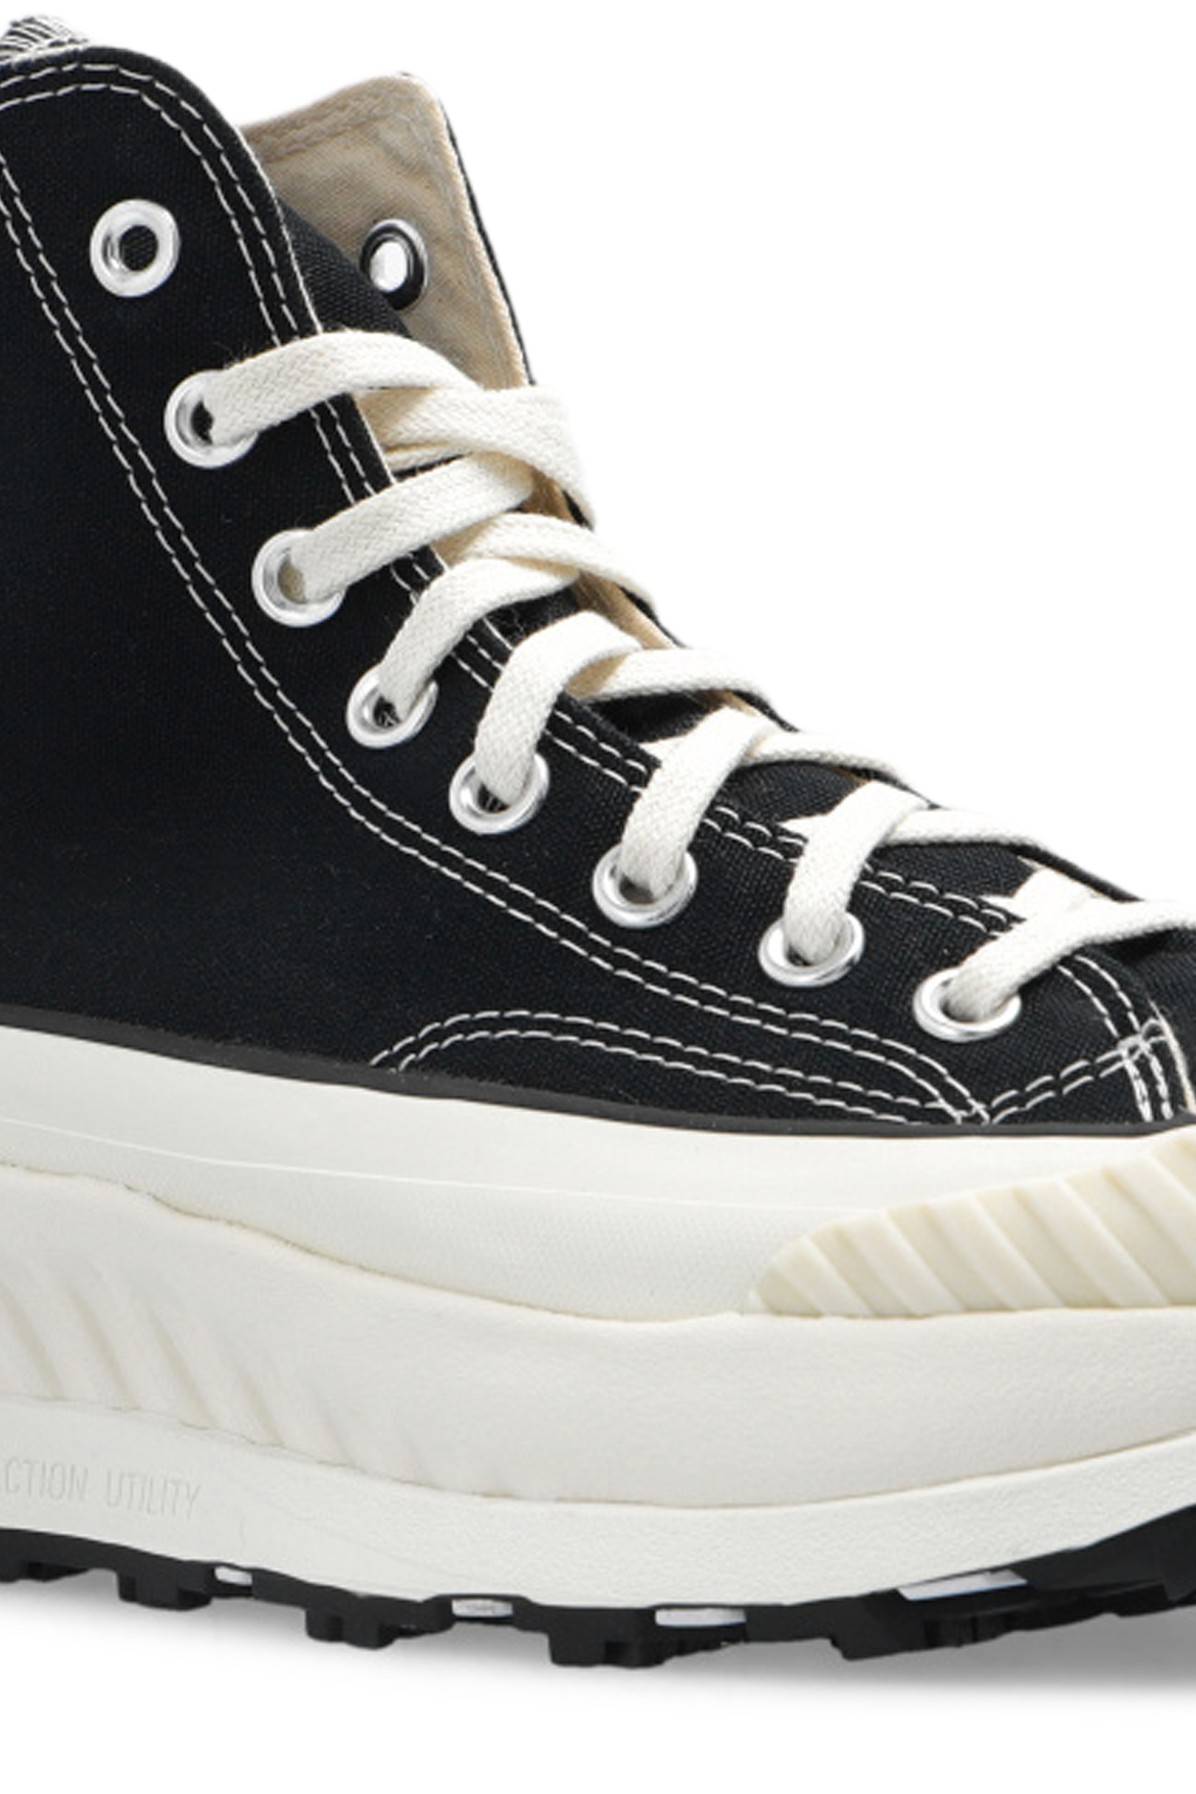 Converse Chuck 70 AT-CX sneakers